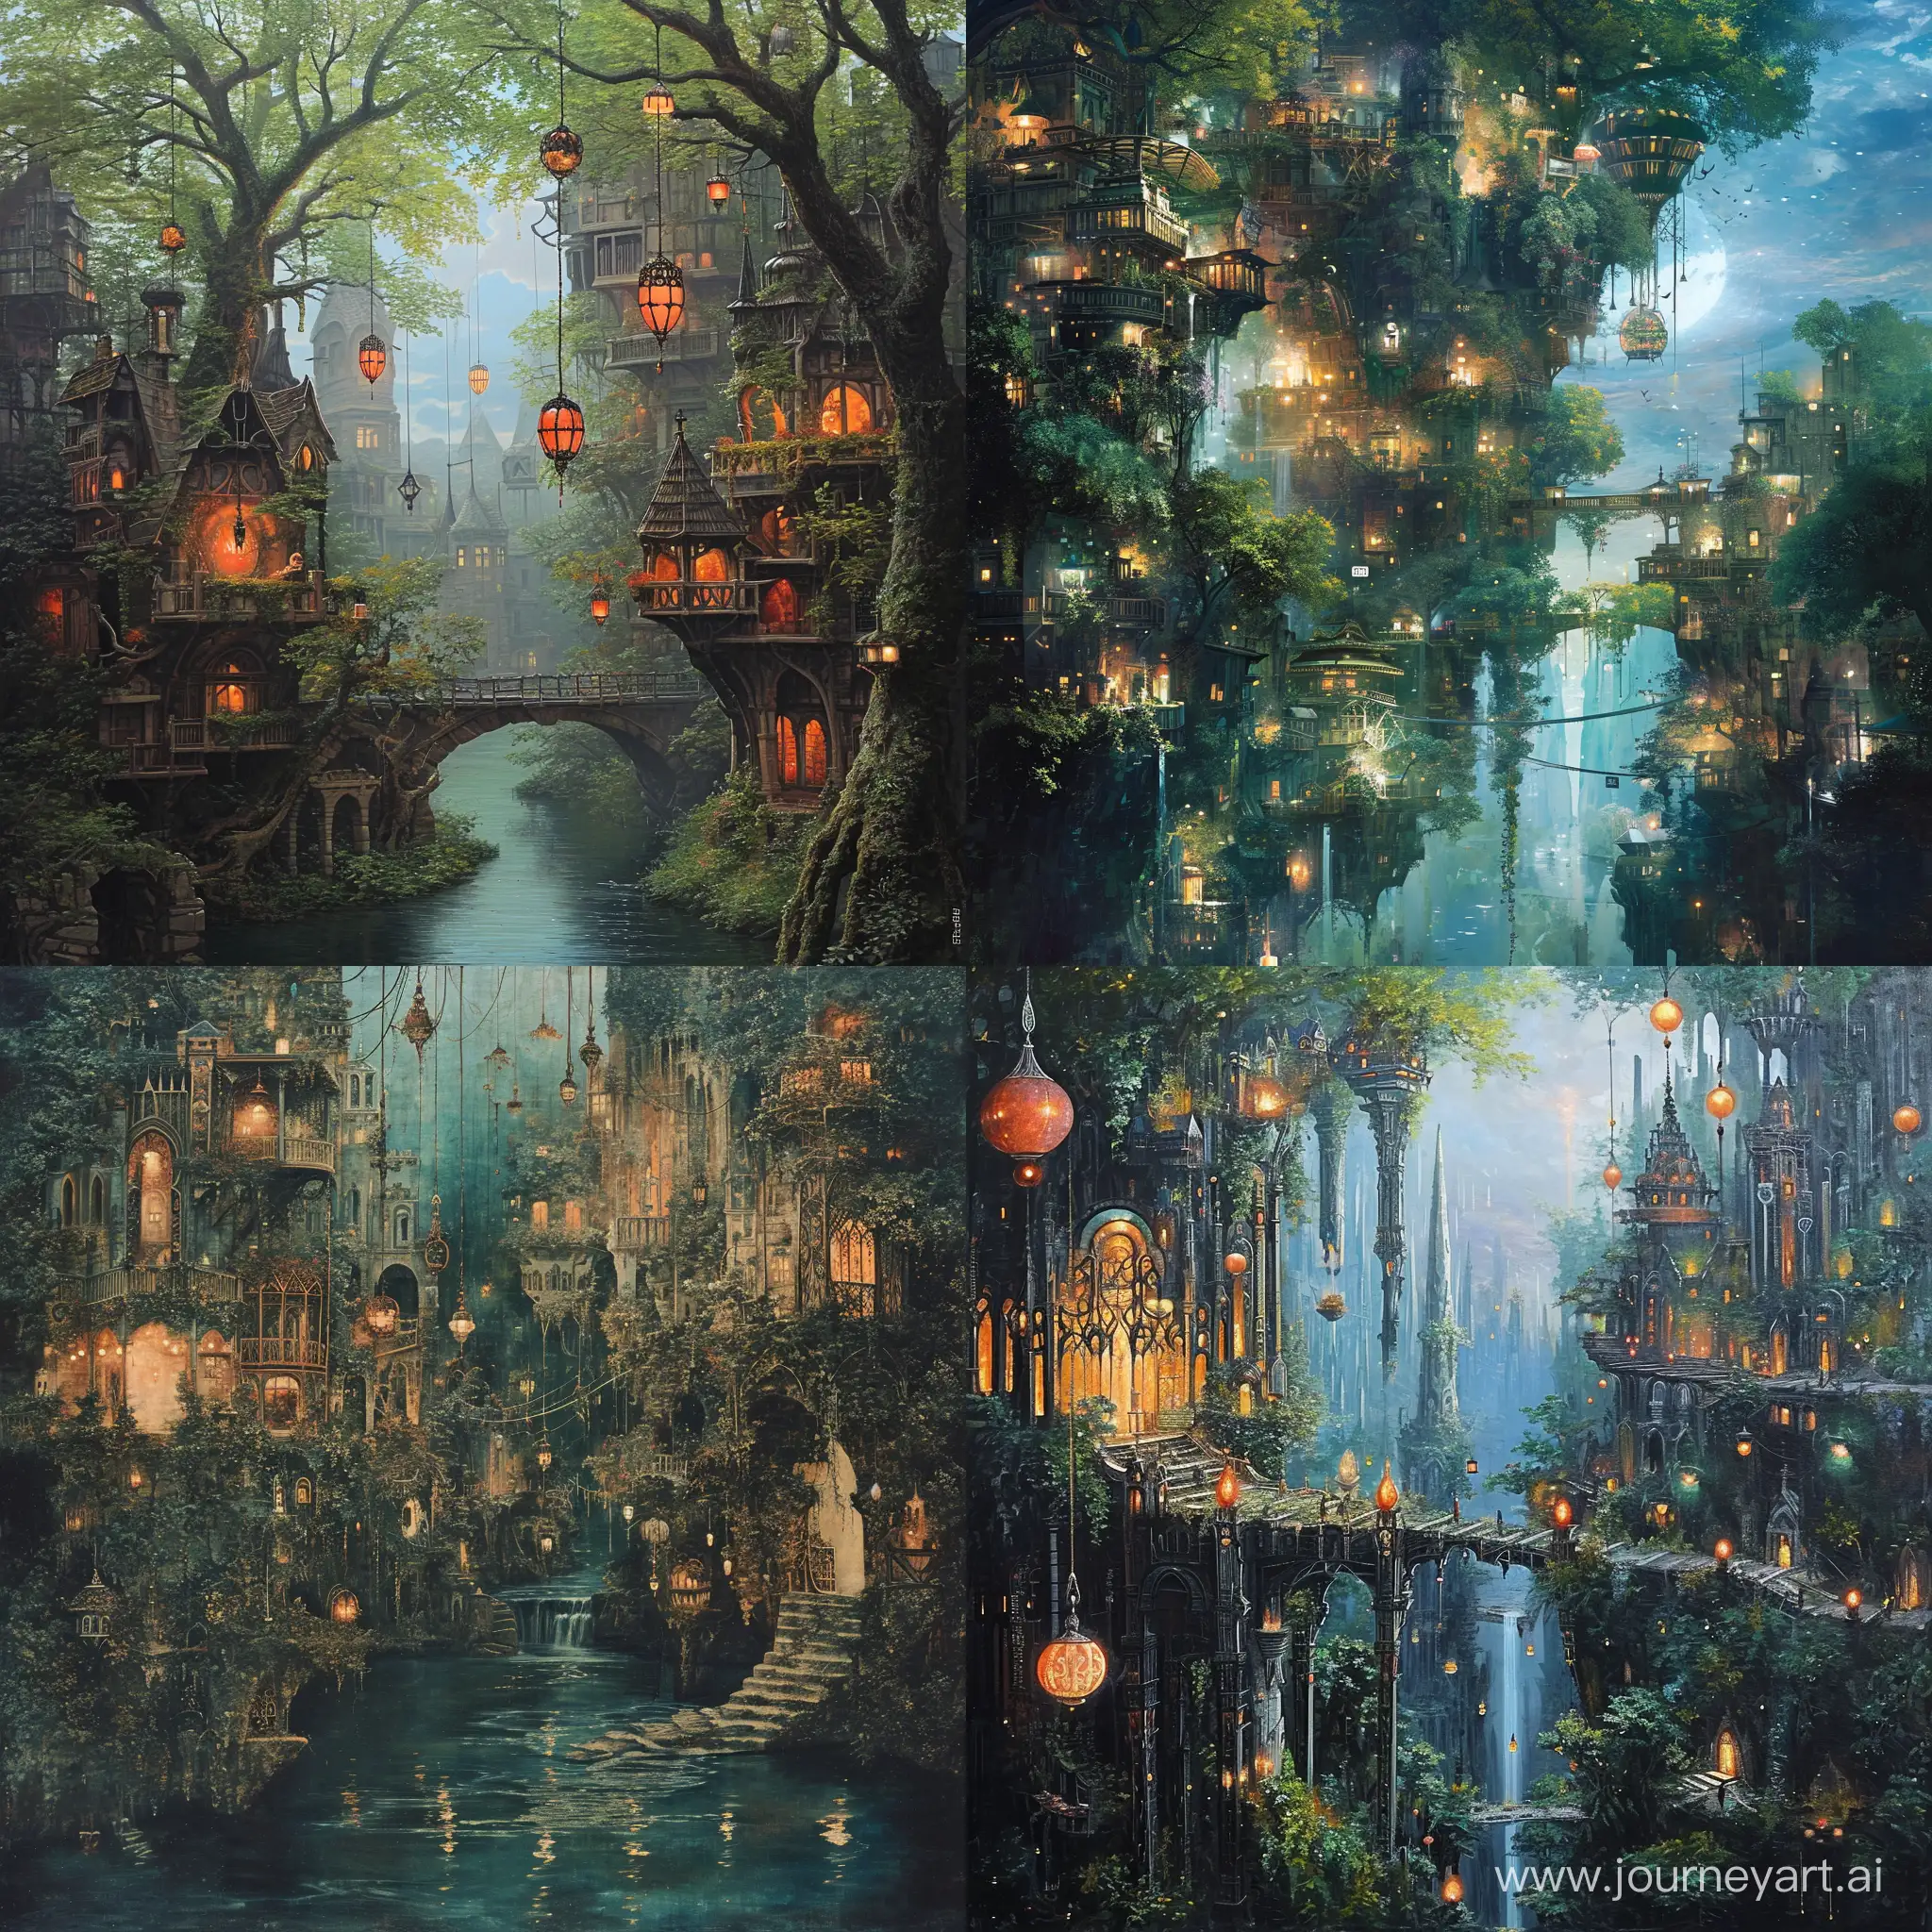 Romanticism::1.2. depicts a fantastical cityscape with a river running through the middle. The buildings are covered in plants and there are many hanging objects such as lanterns and signs. The city is surrounded by trees and the sky is blue. --v 6